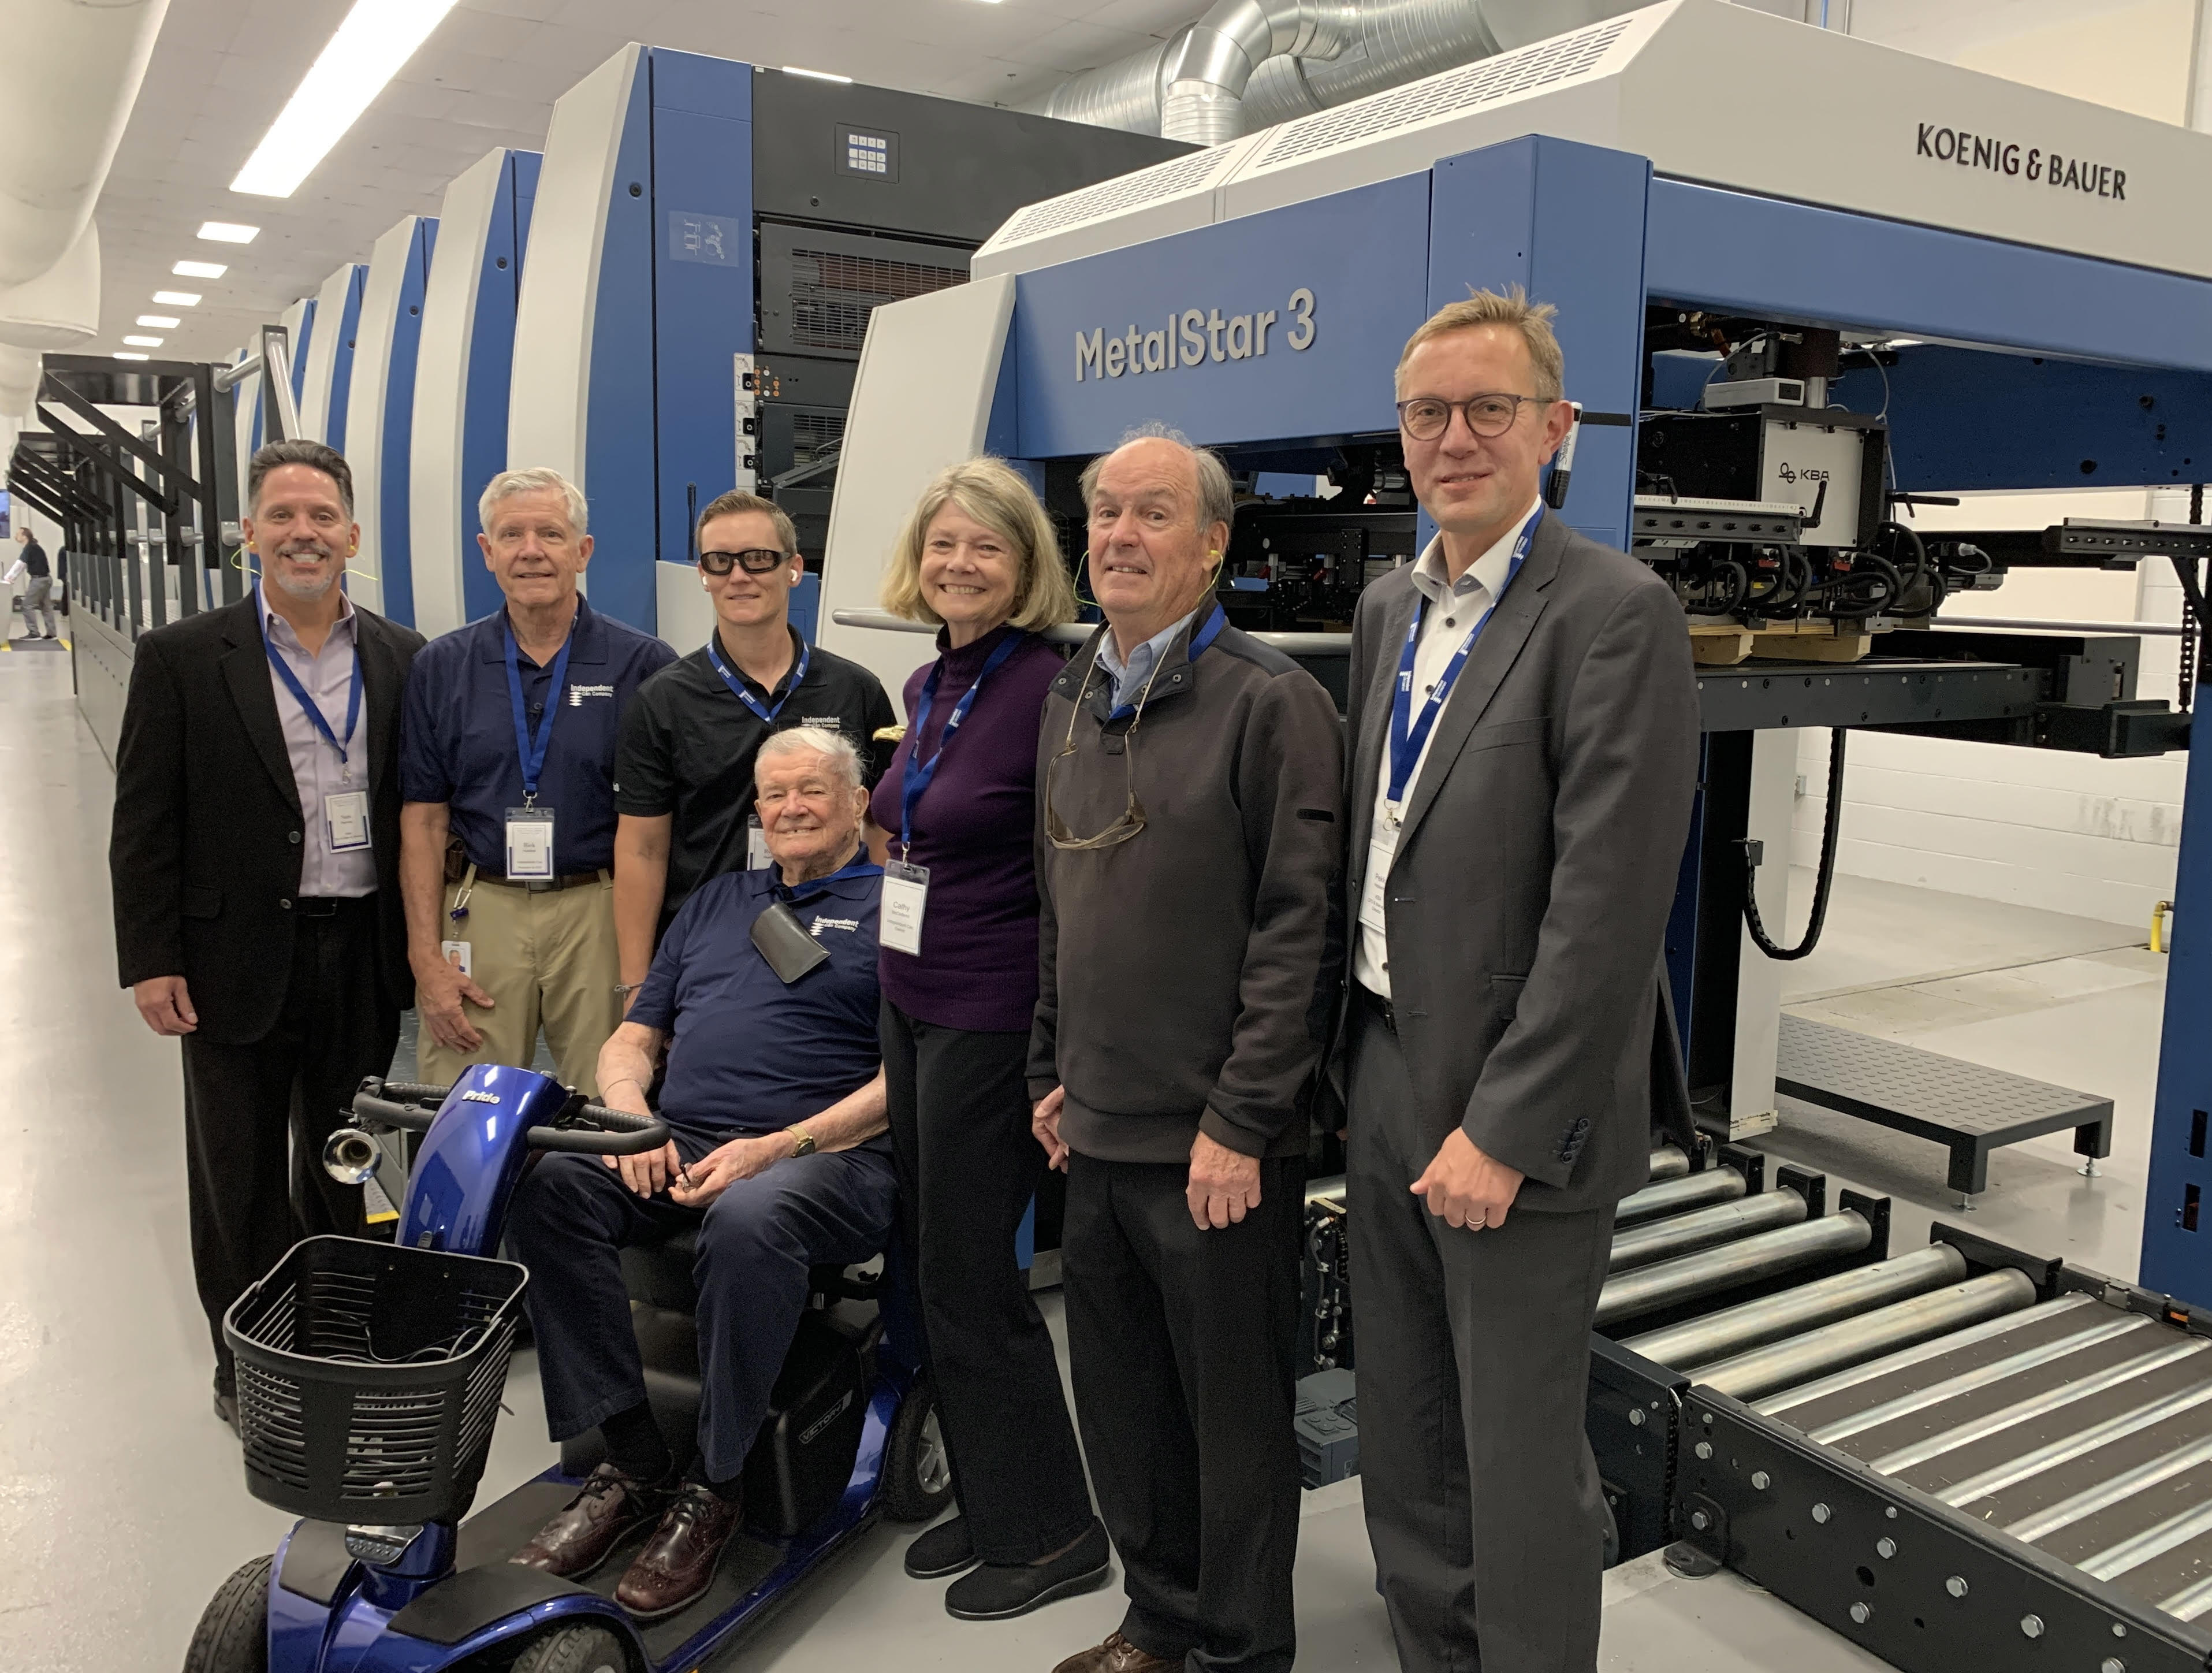 Independent Can Company is the only company in the Western Hemisphere operating the latest MetalStar 3, a nine-color printing line by Koenig & Bauer.